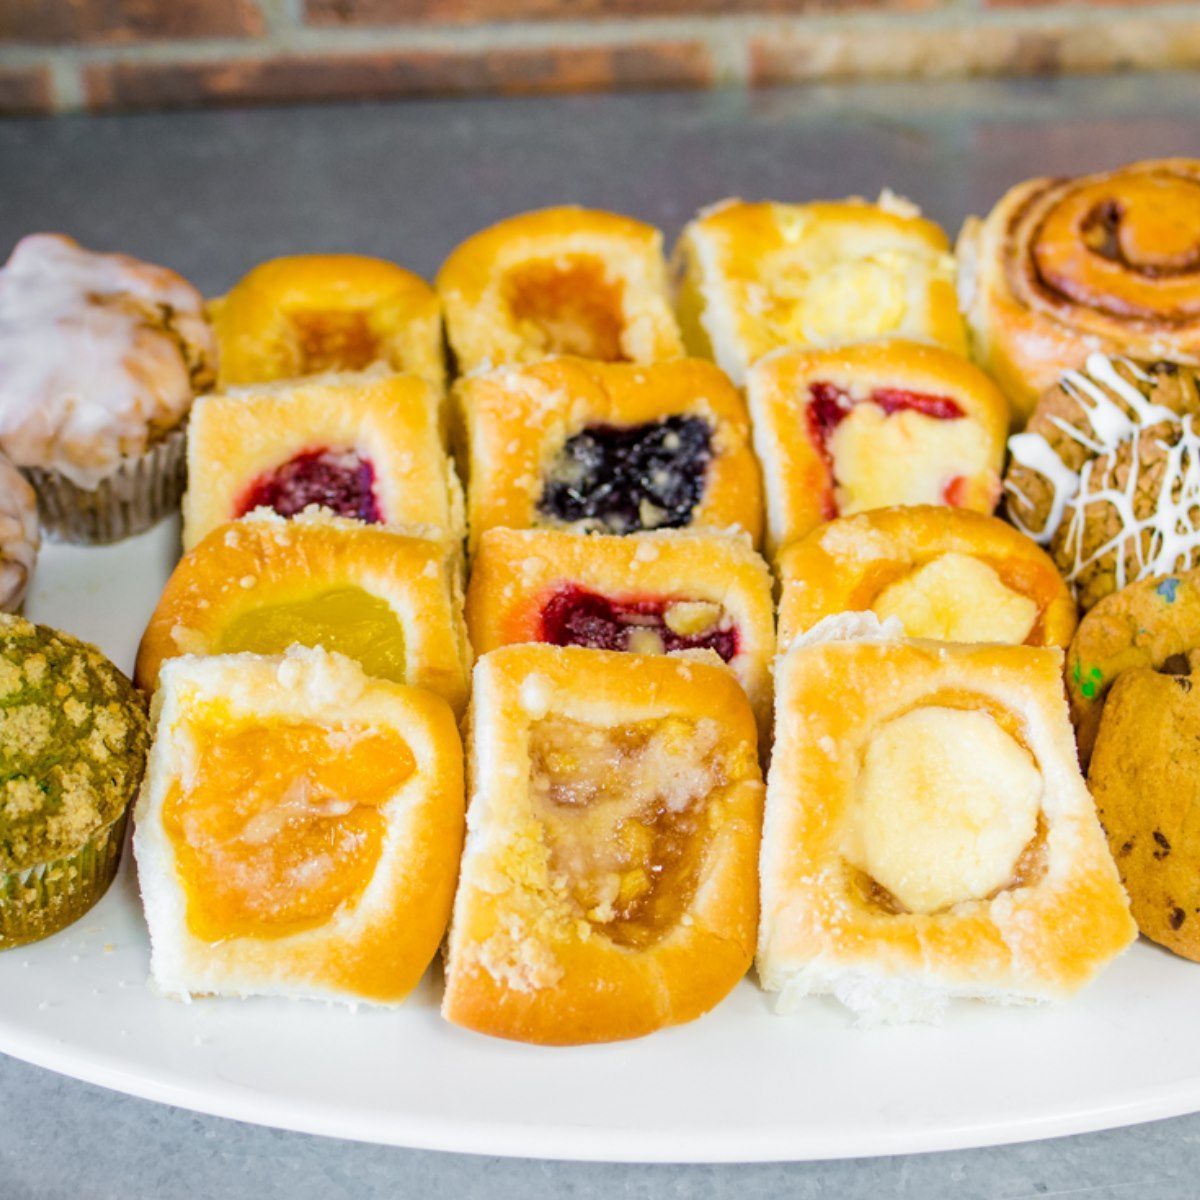 Color photo of pastries